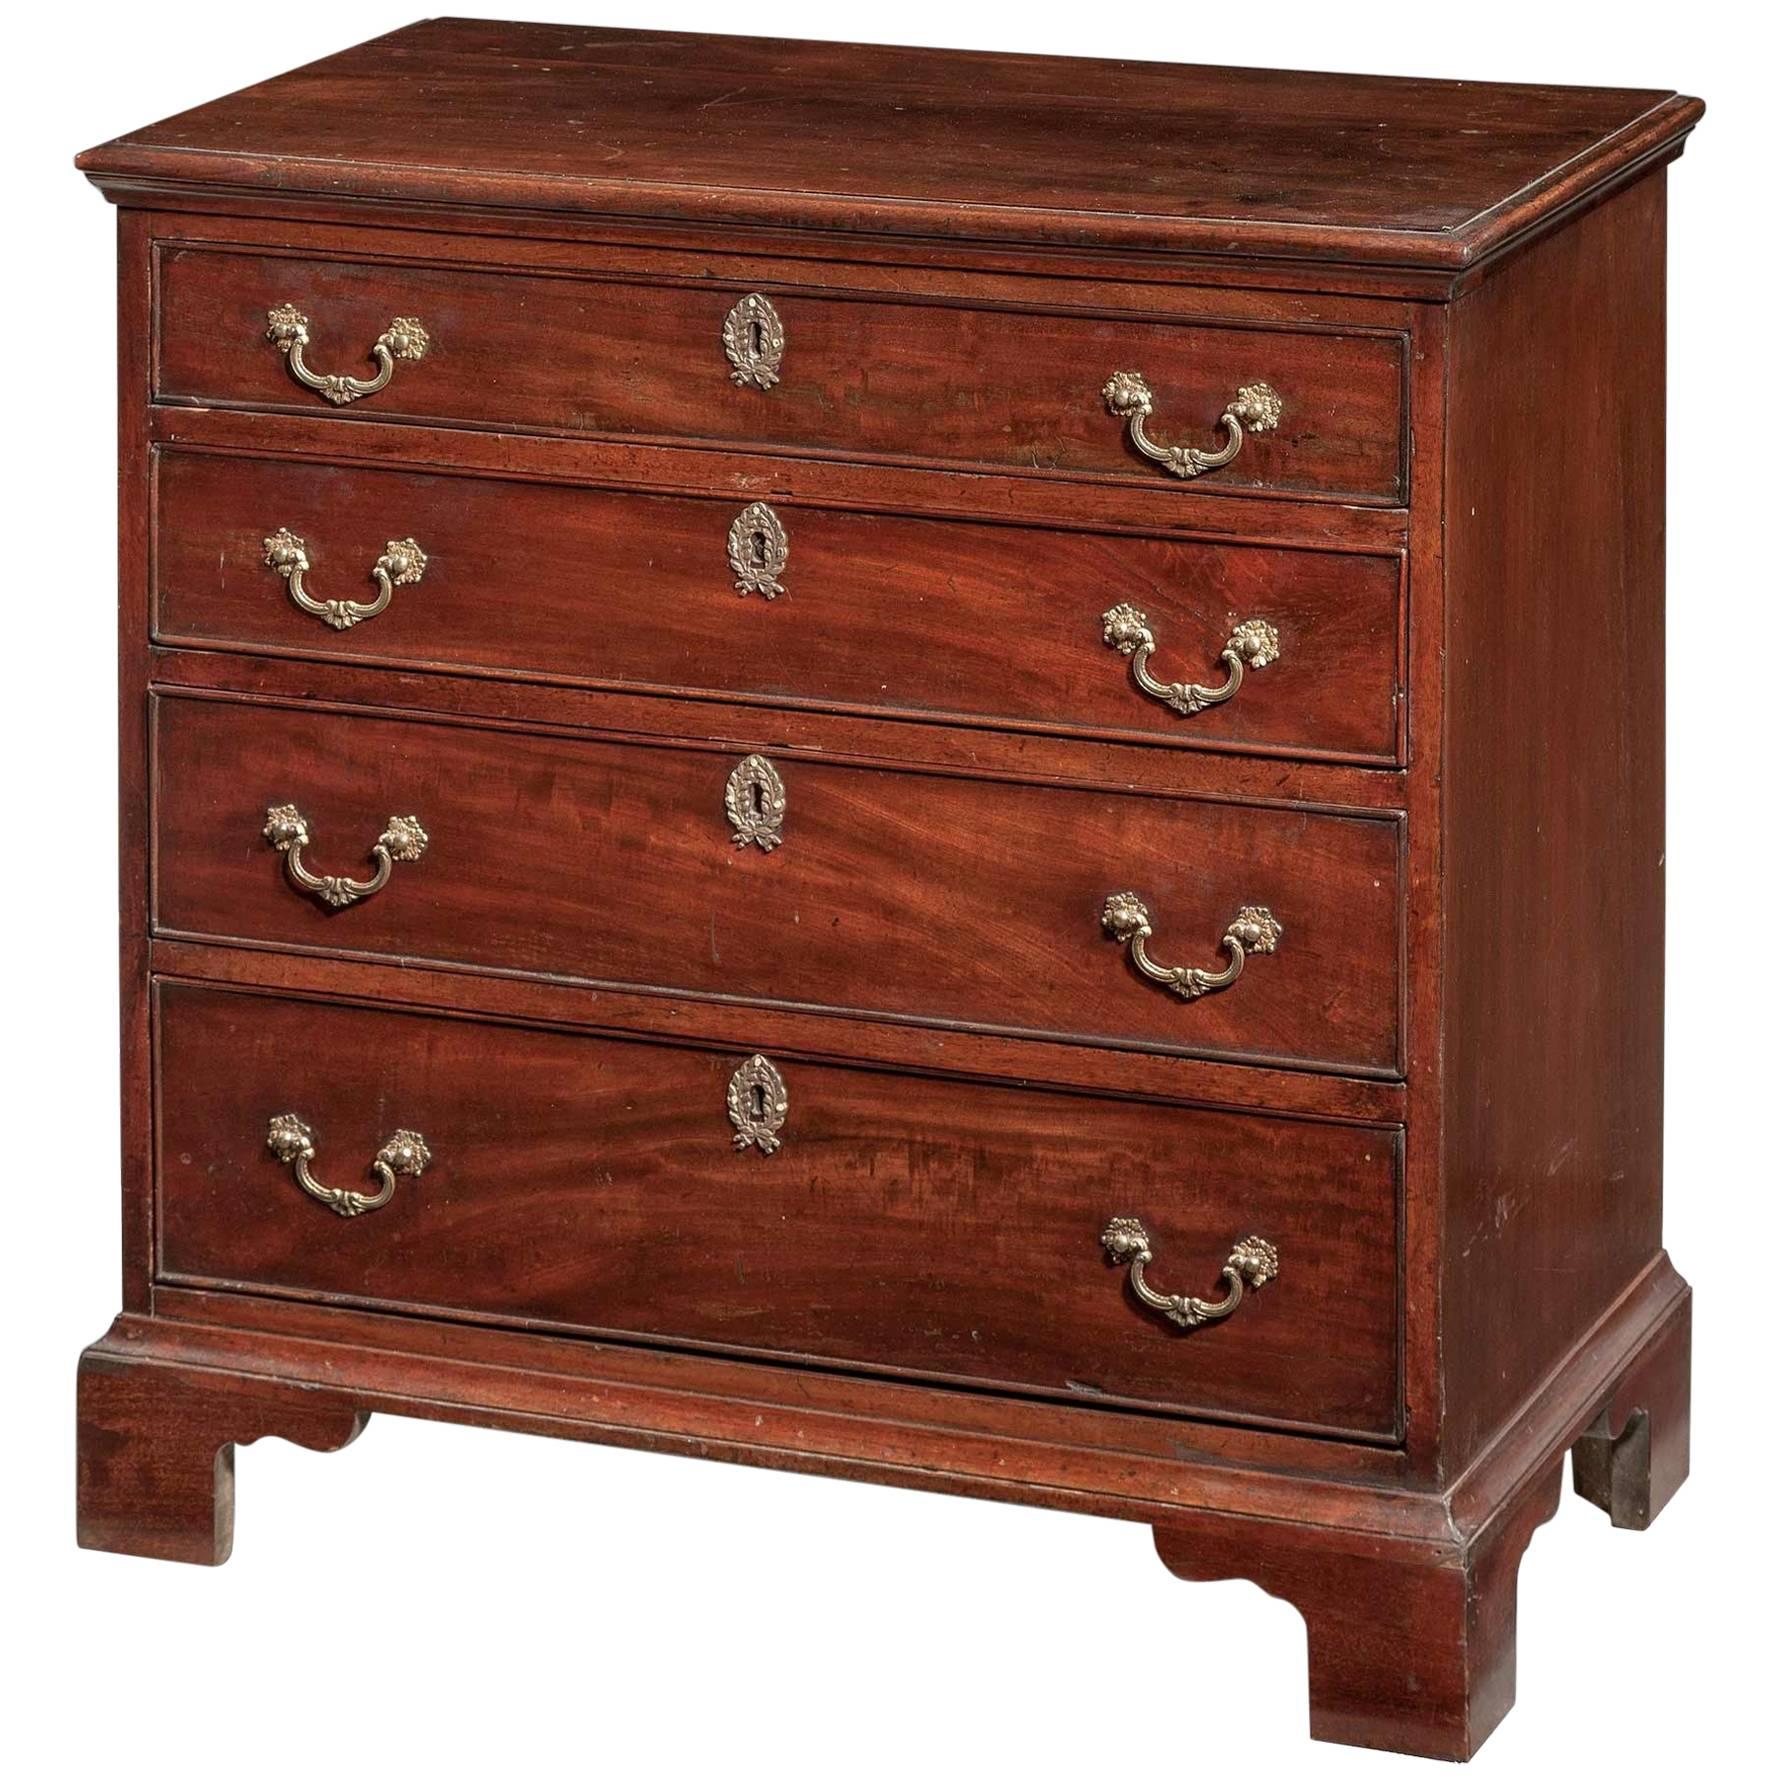 George III Period Mahogany Chest of Drawers with a Dressing Slide